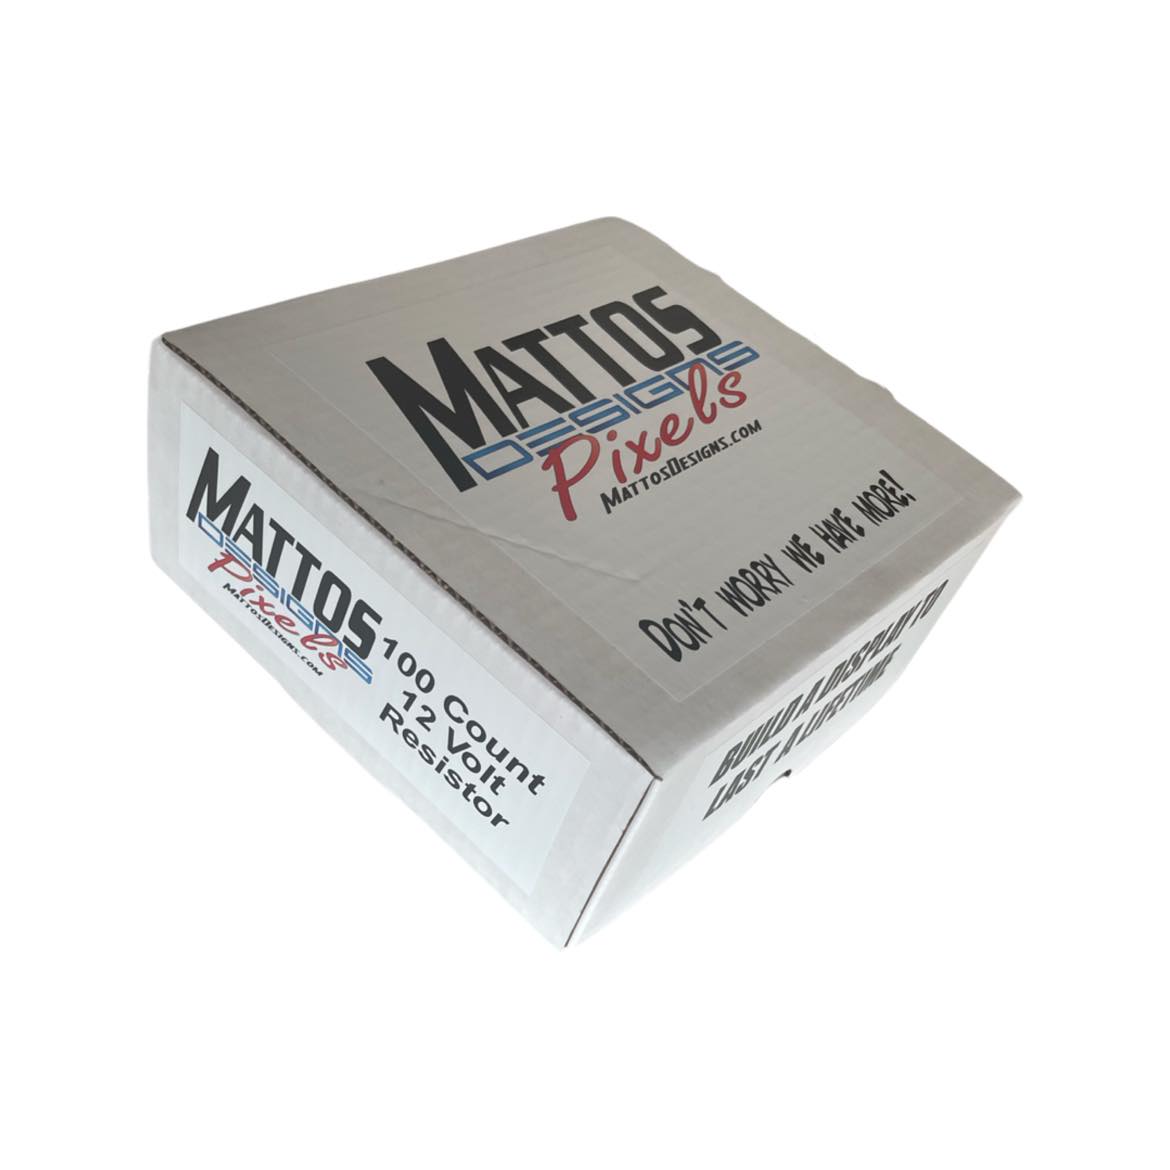 Mattos Designs 12v Resistor Pixels / 4in Spacing / Box of 2x50ct / xConnect